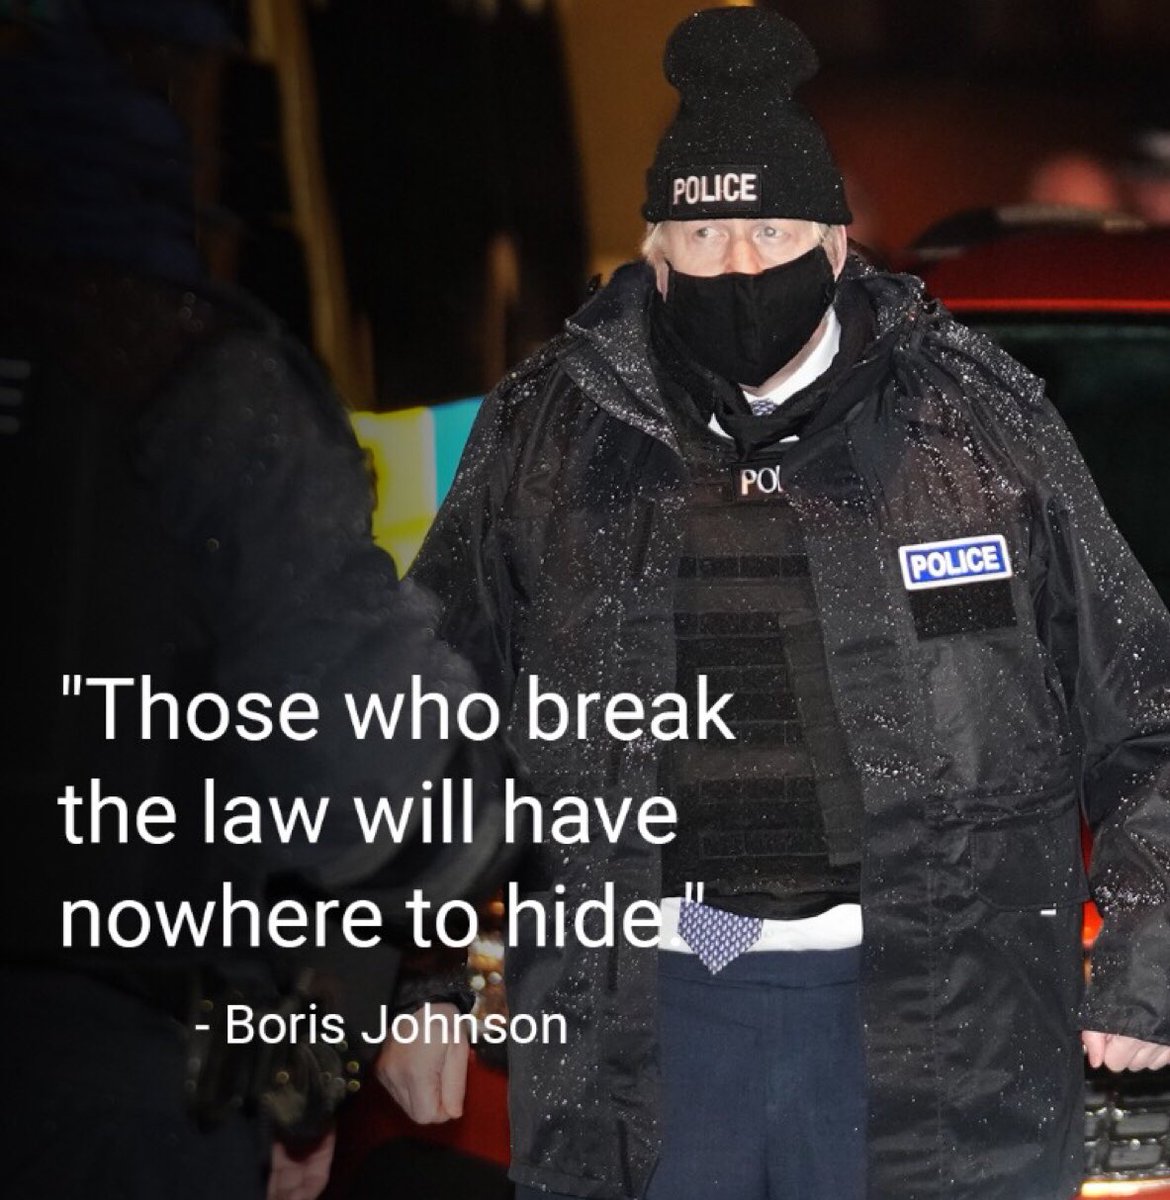 🔴BORIS JOHNSON 'Those who break the law will have nowhere to hide.' 👉RETWEET if you agree Johnson should be investigated.